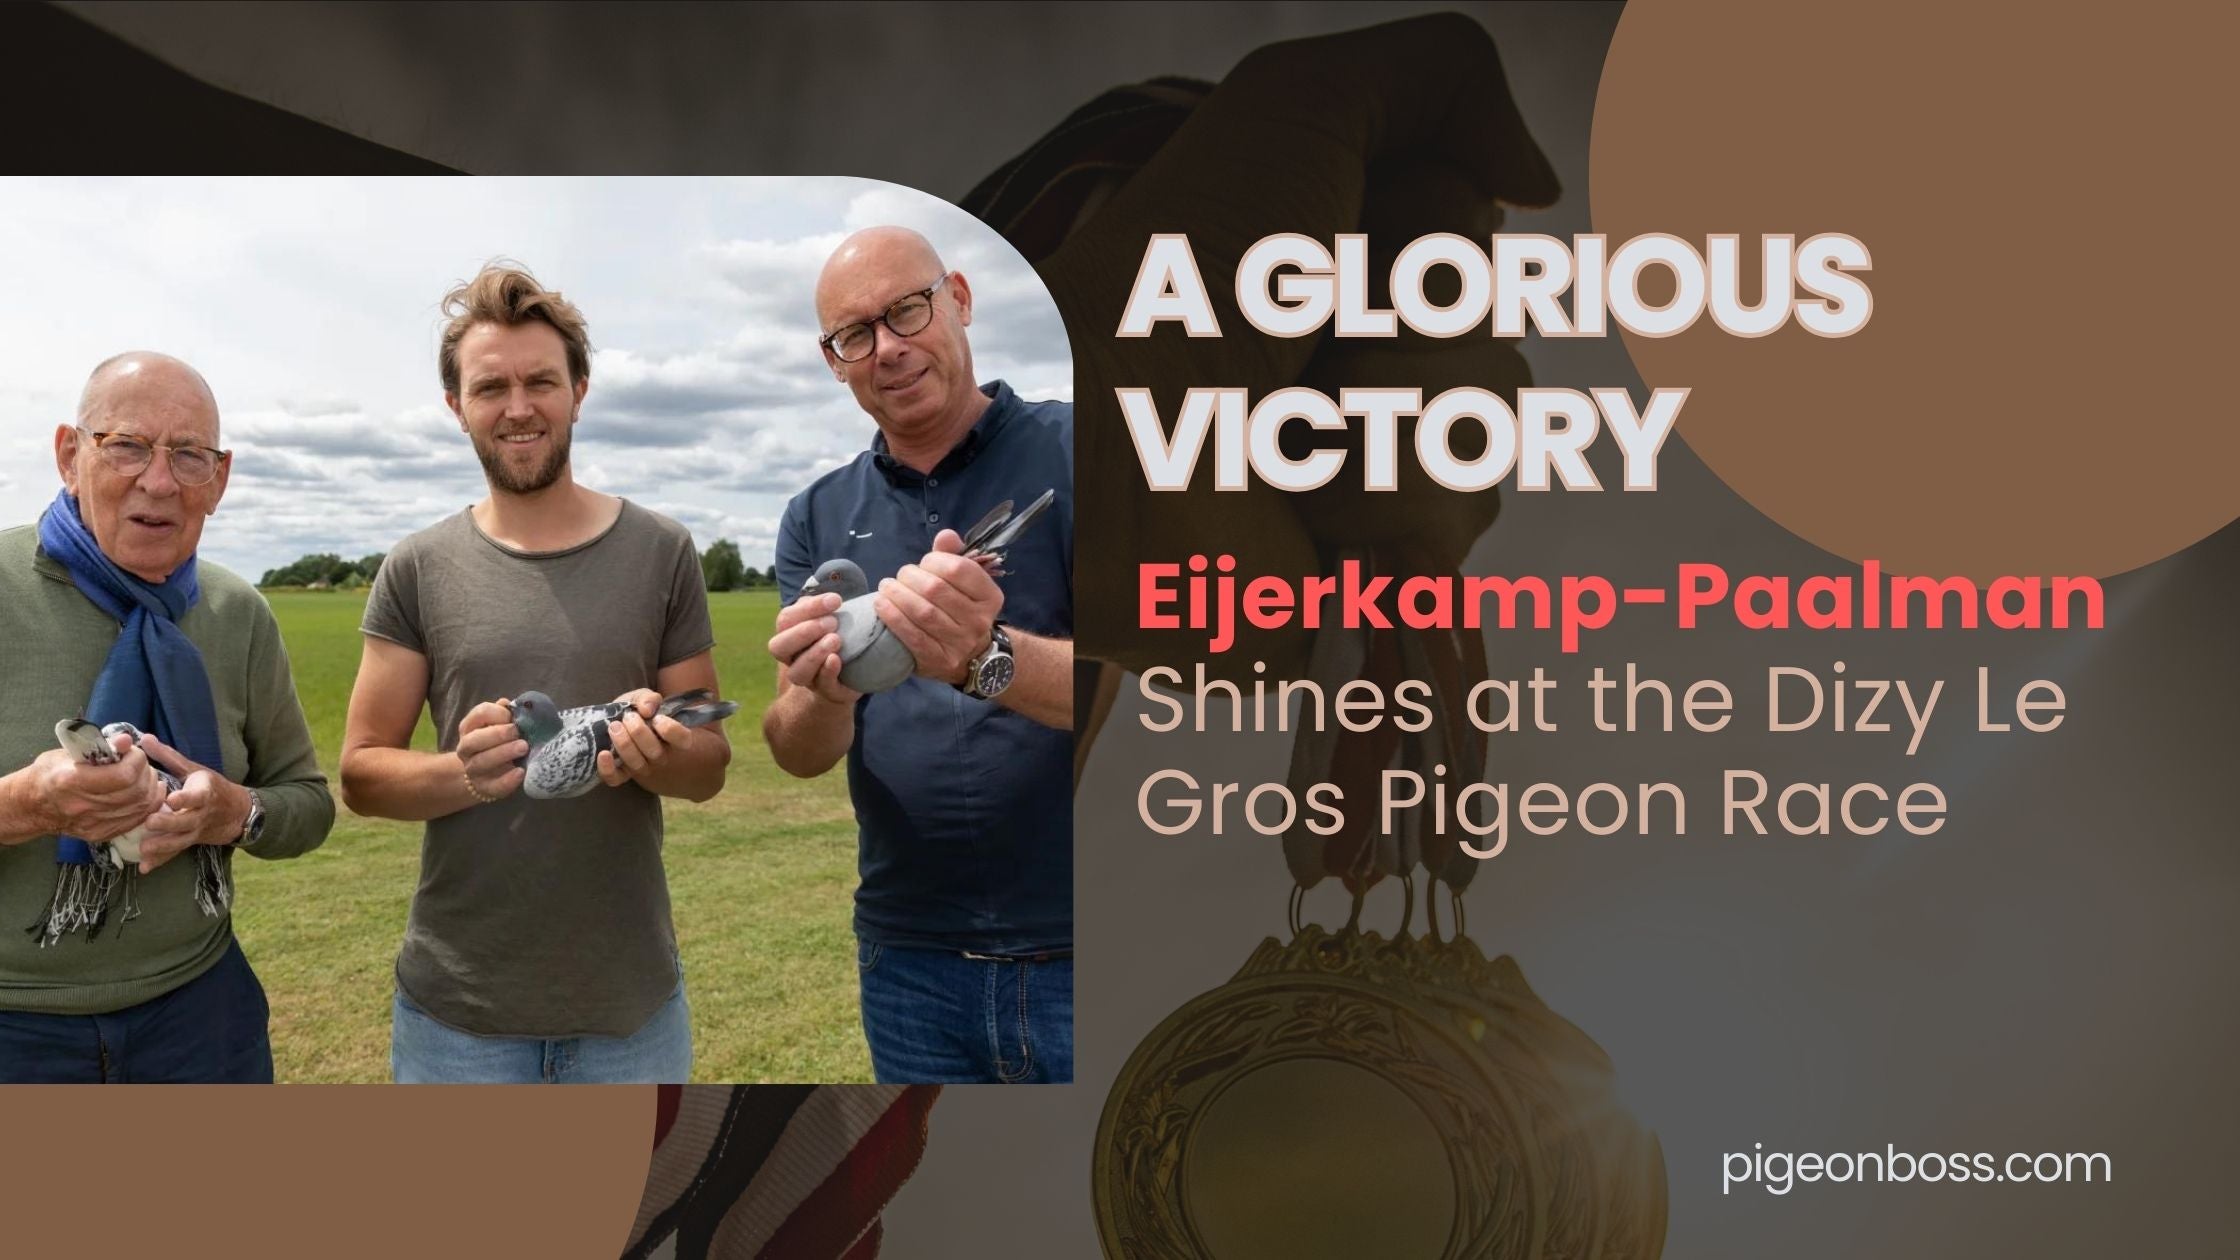 A Glorious Victory: Eijerkamp-Paalman Shines at the Dizy Le Gros Pigeon Race